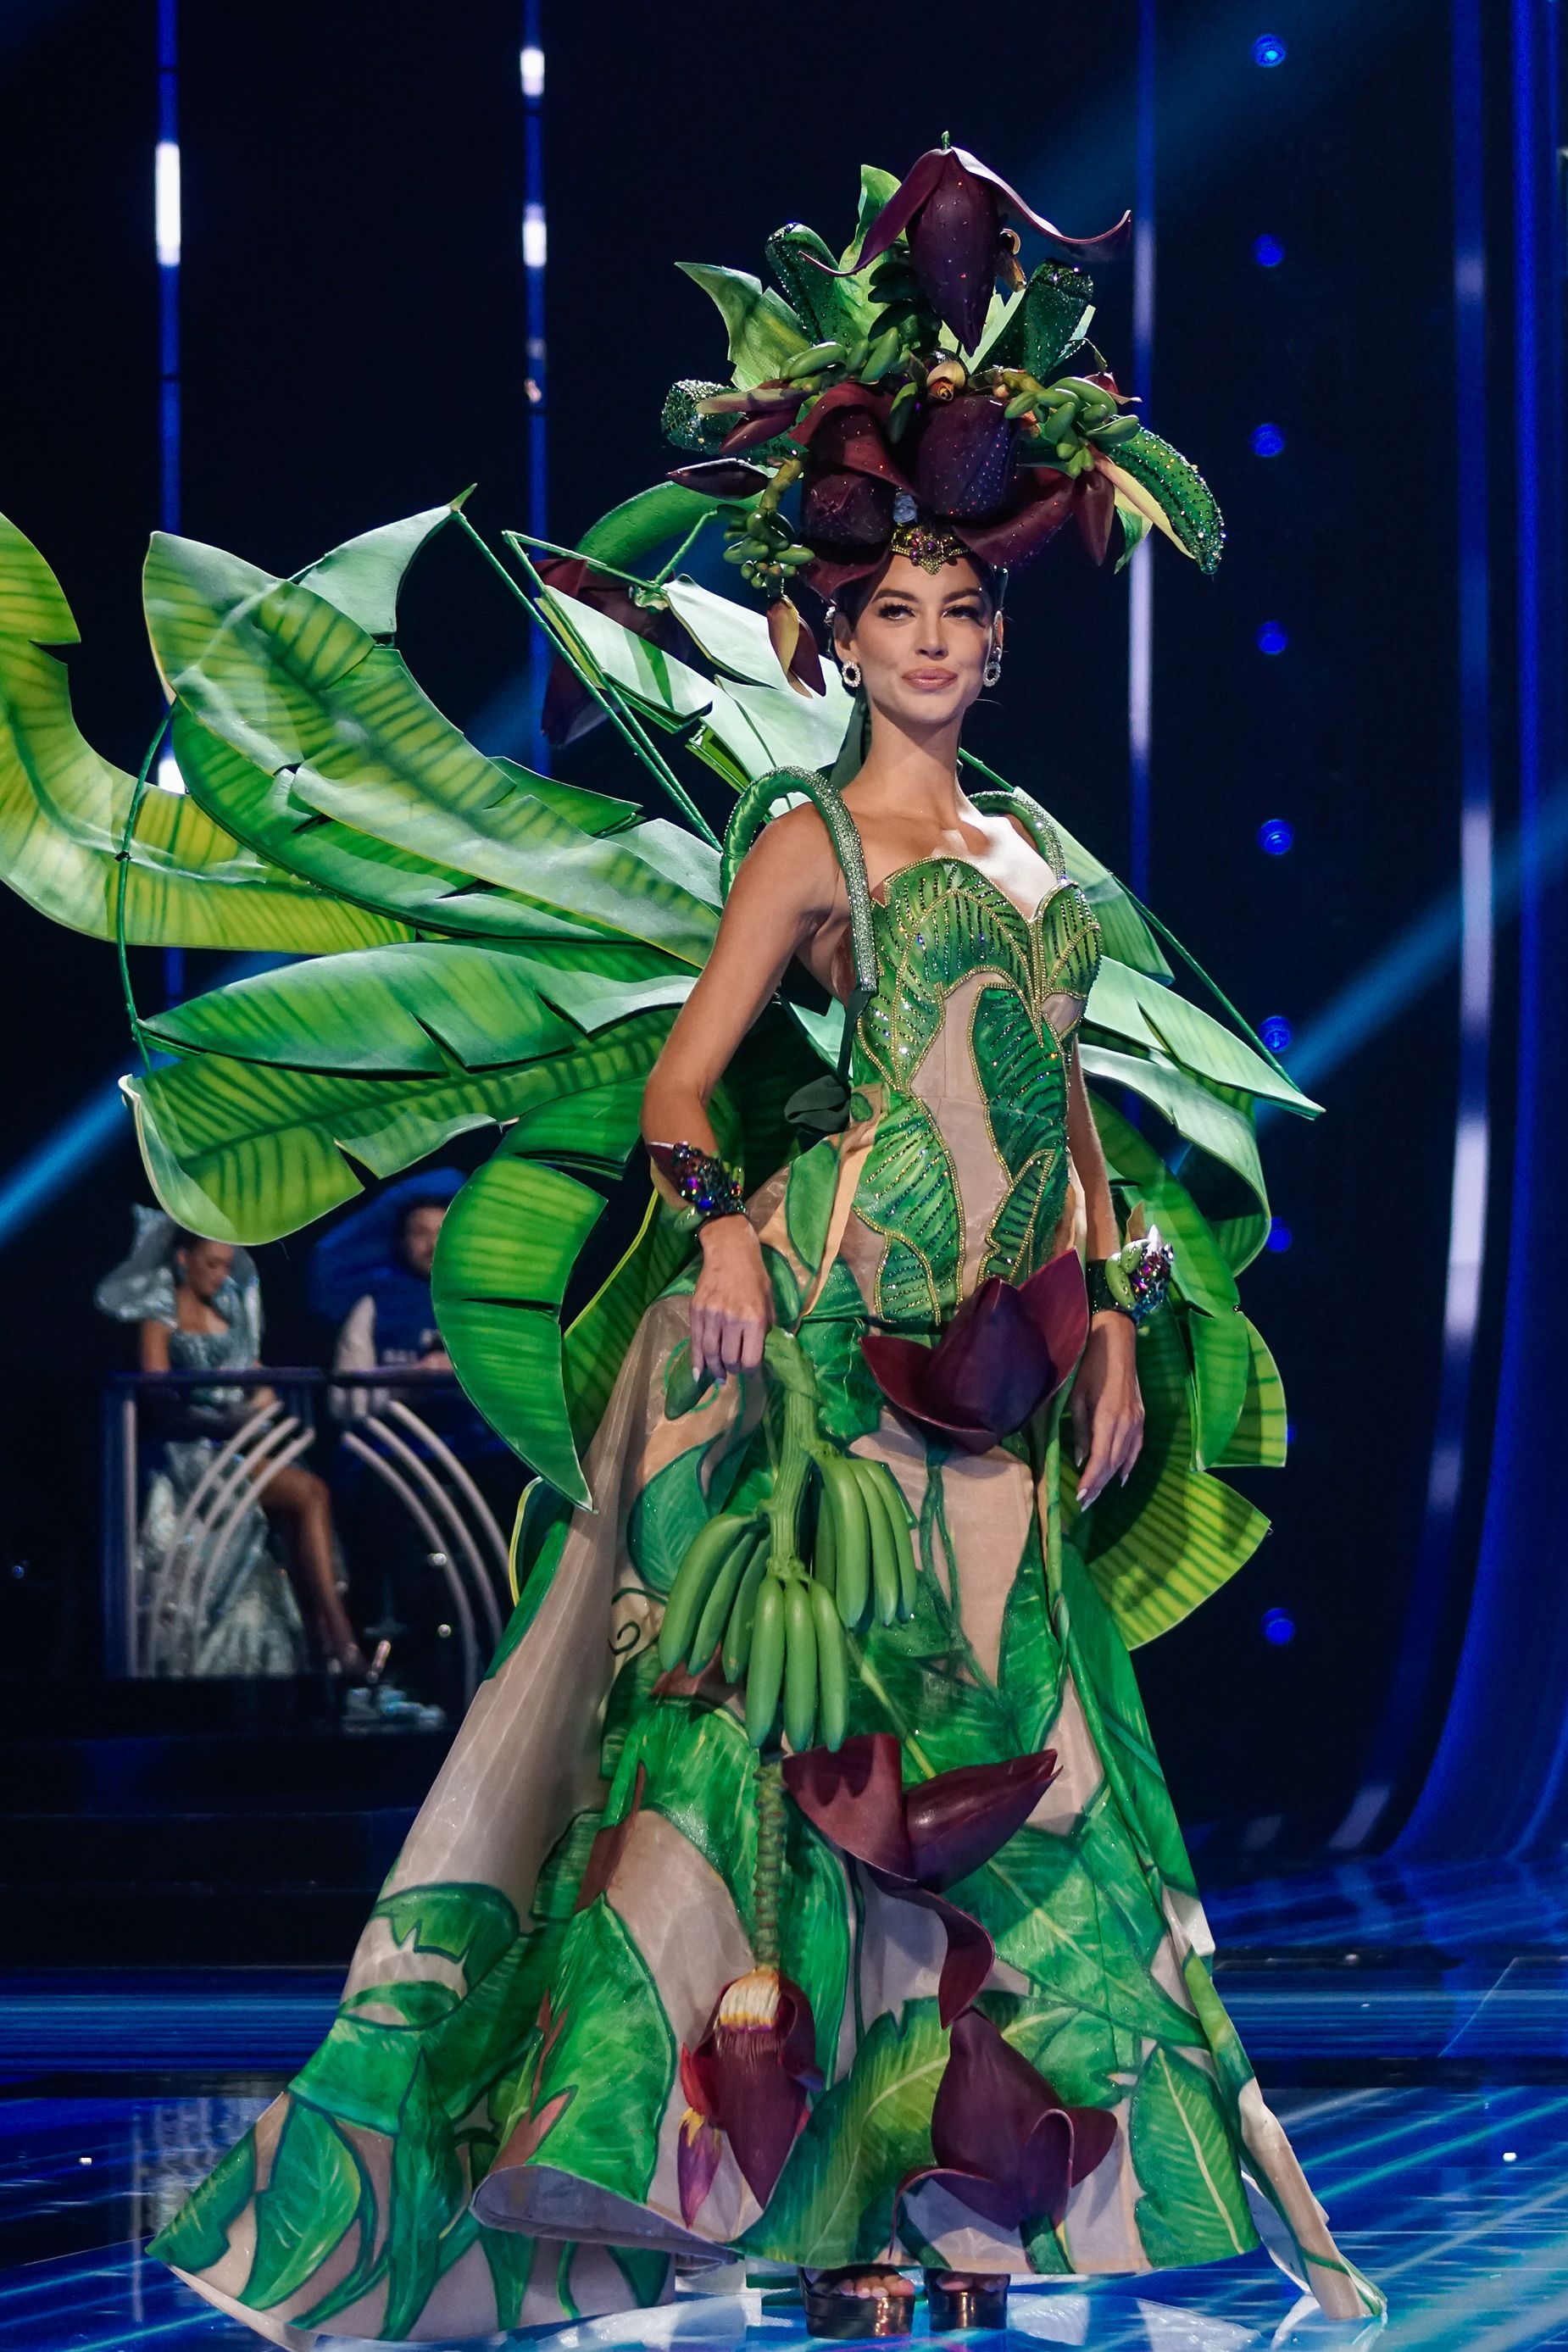 Miss Dominican Republic's costume, meanwhile, was all about the plantain, with what commentators described as a "ready-to-eat" headpiece.